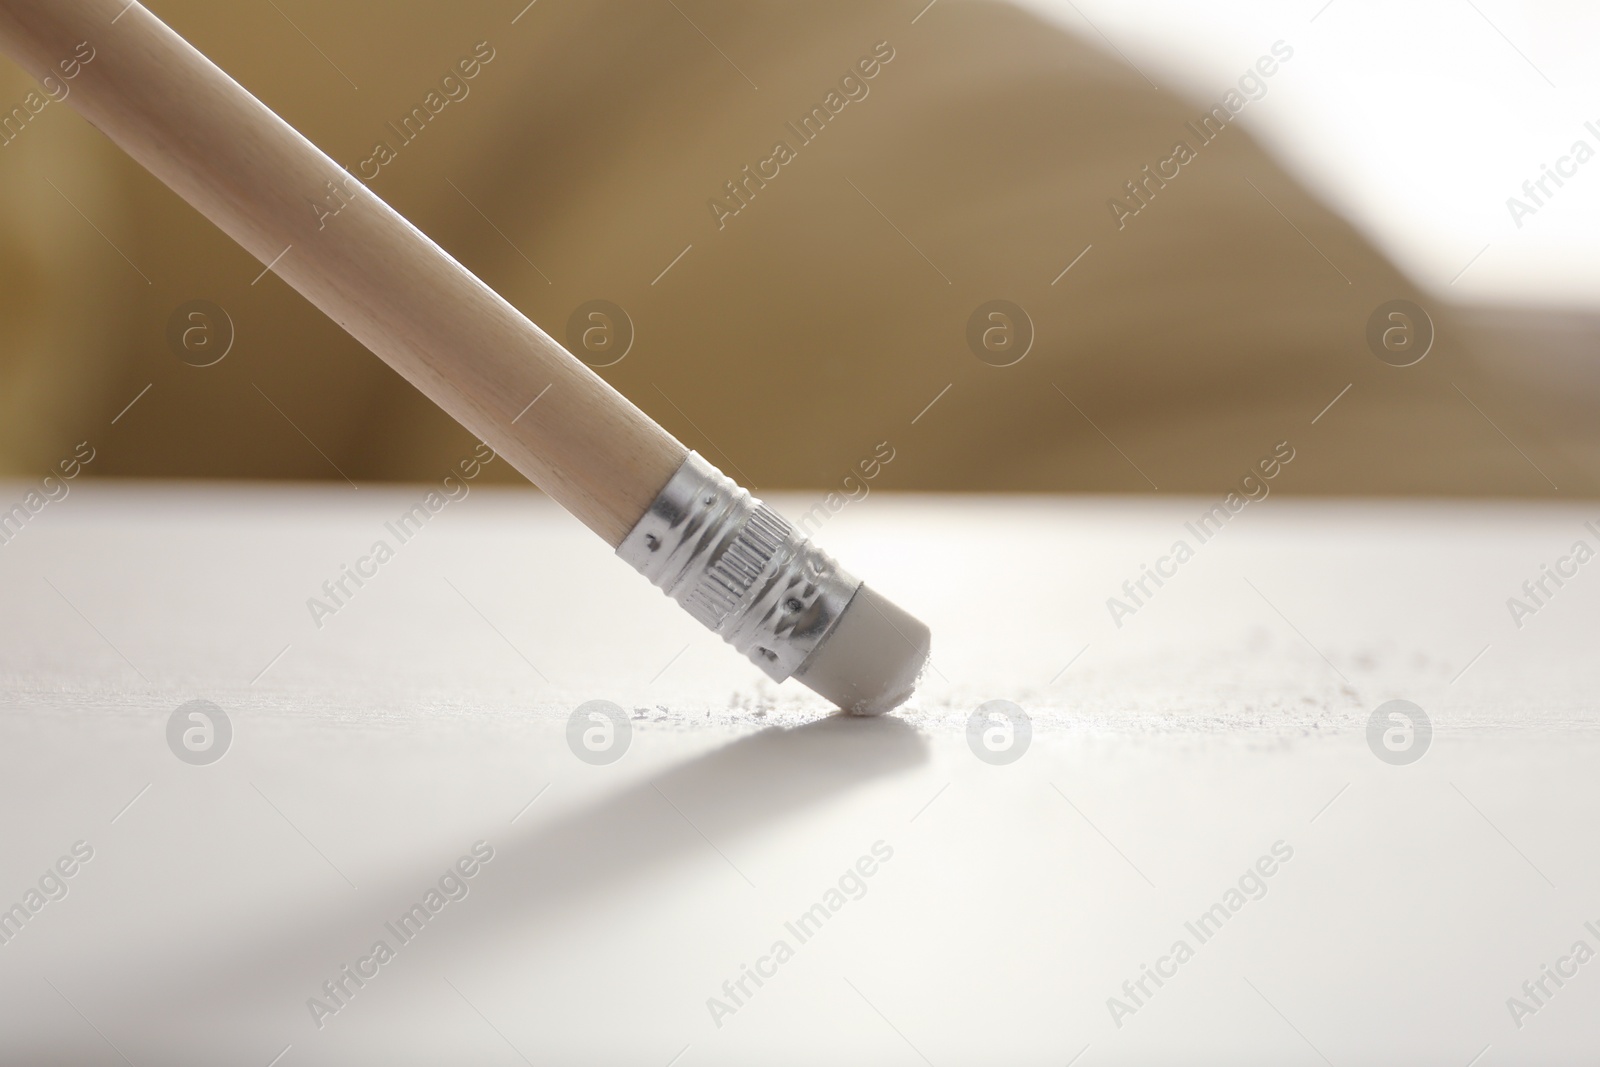 Photo of Correcting picture on paper with pencil eraser, closeup view